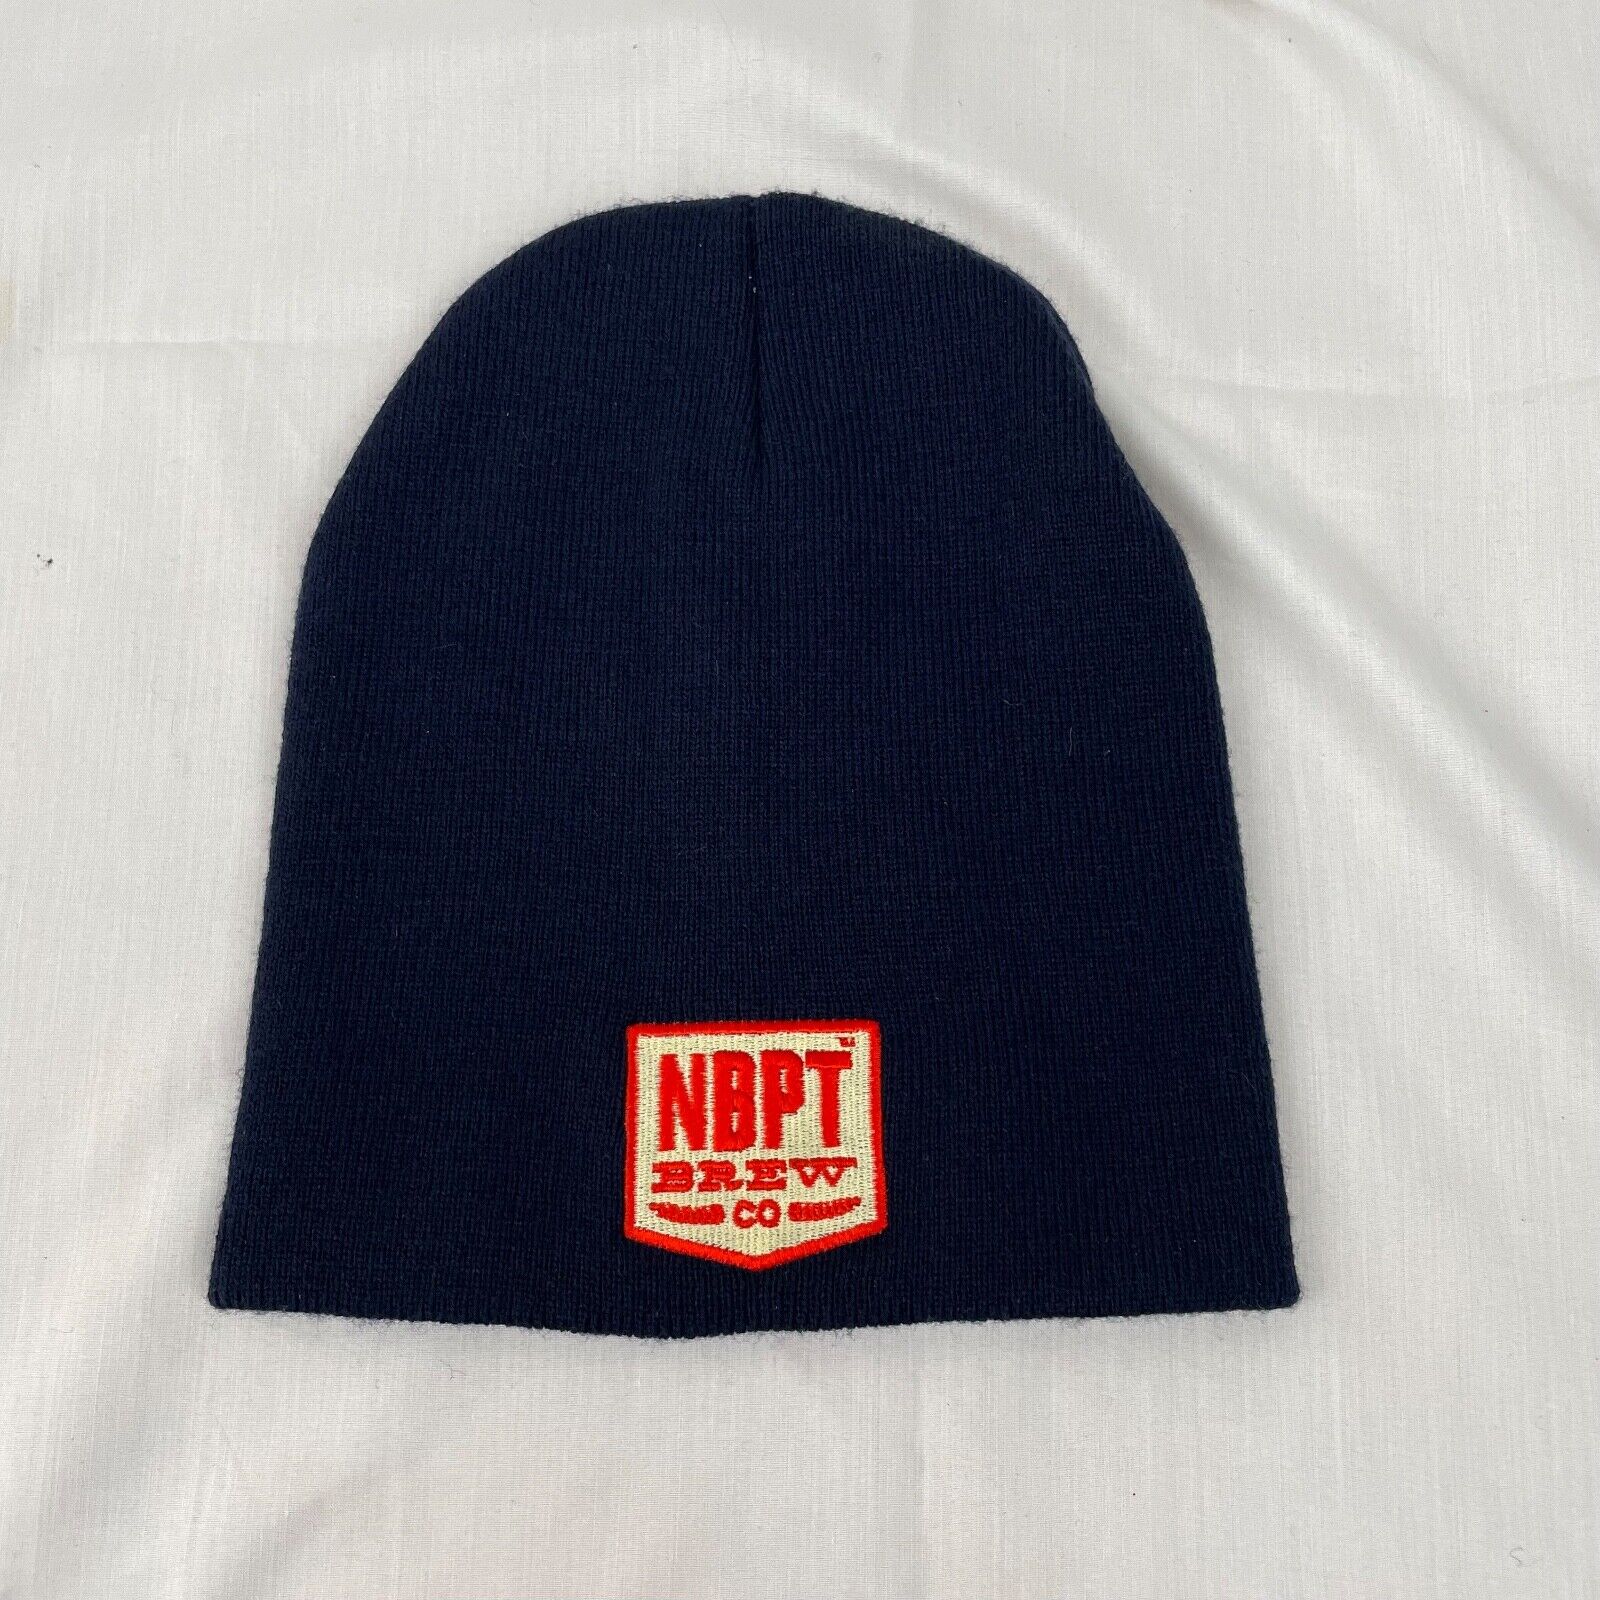 Newburyport Brewing Company Beanie Stitched NBPT Embroidered